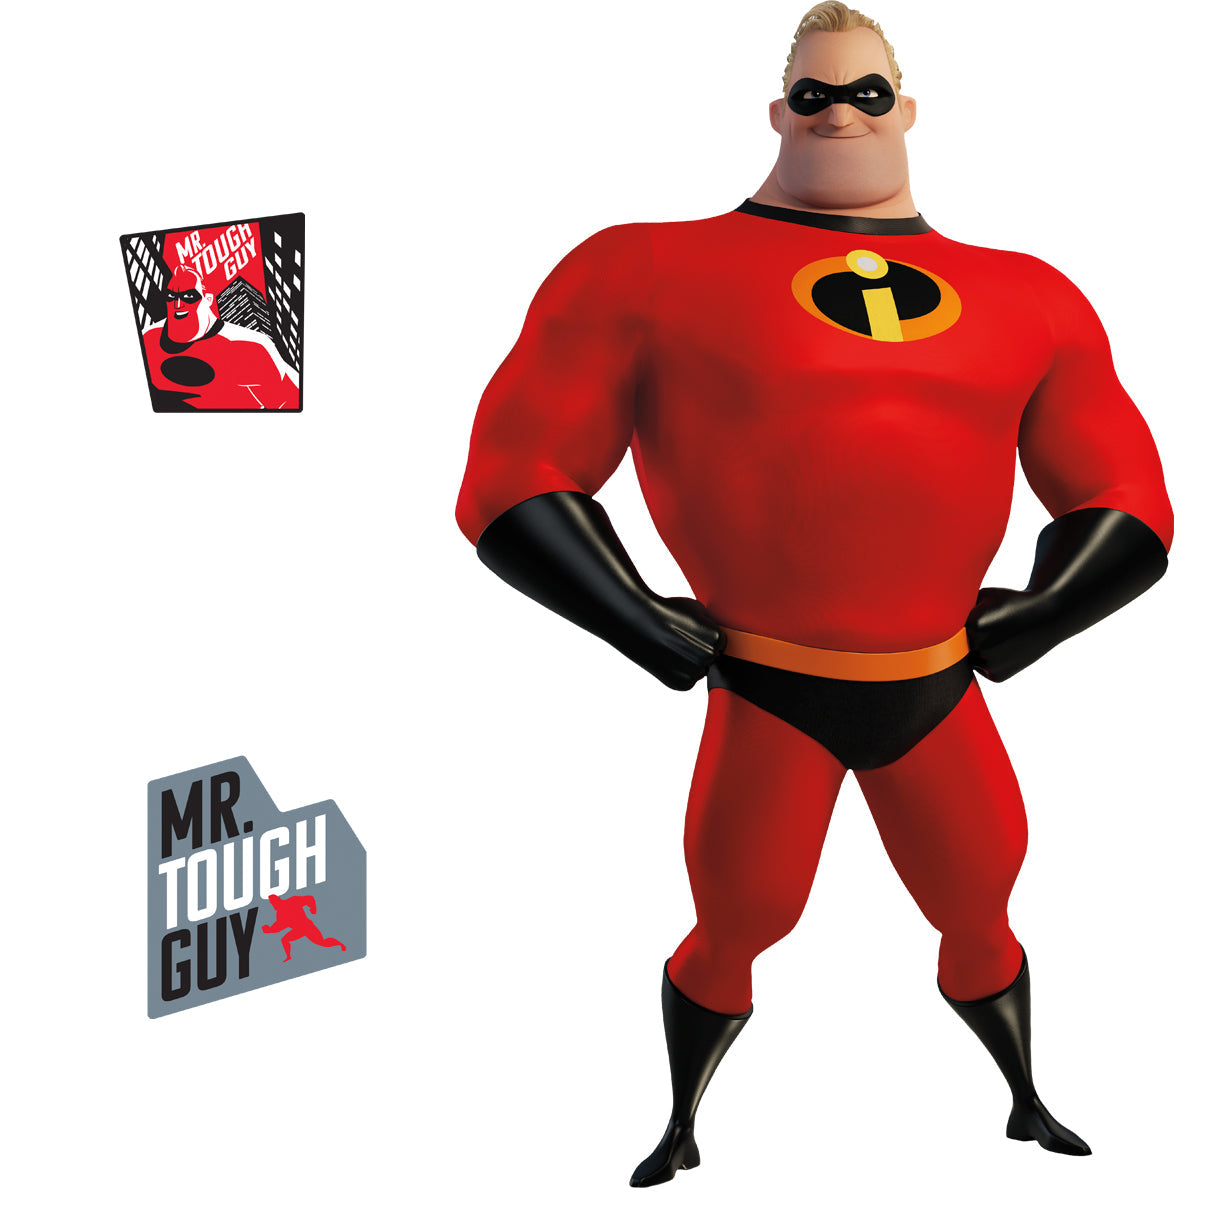 Incredibles 2: Mr. Incredible RealBig        - Officially Licensed Disney Removable     Adhesive Decal